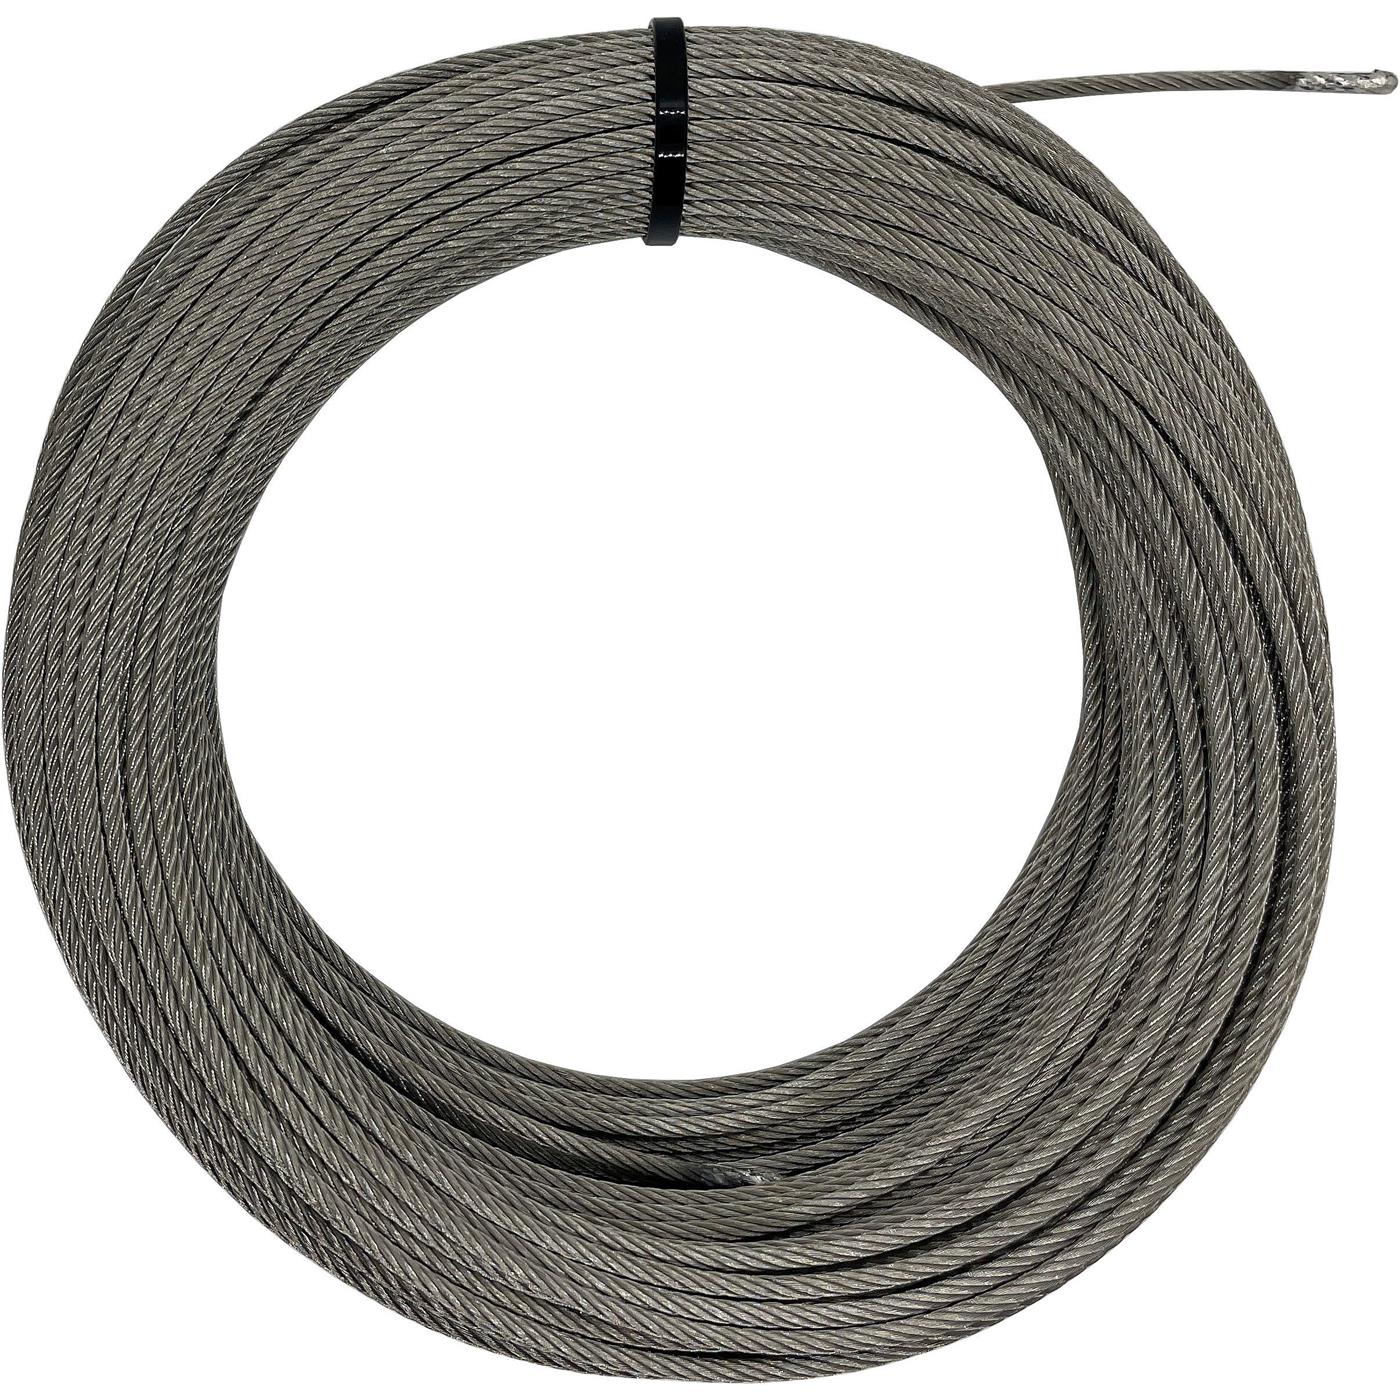 Wire rope 100m Stainless steel V4A 316 4mm 7x19 Ropes stainless for trellis systems